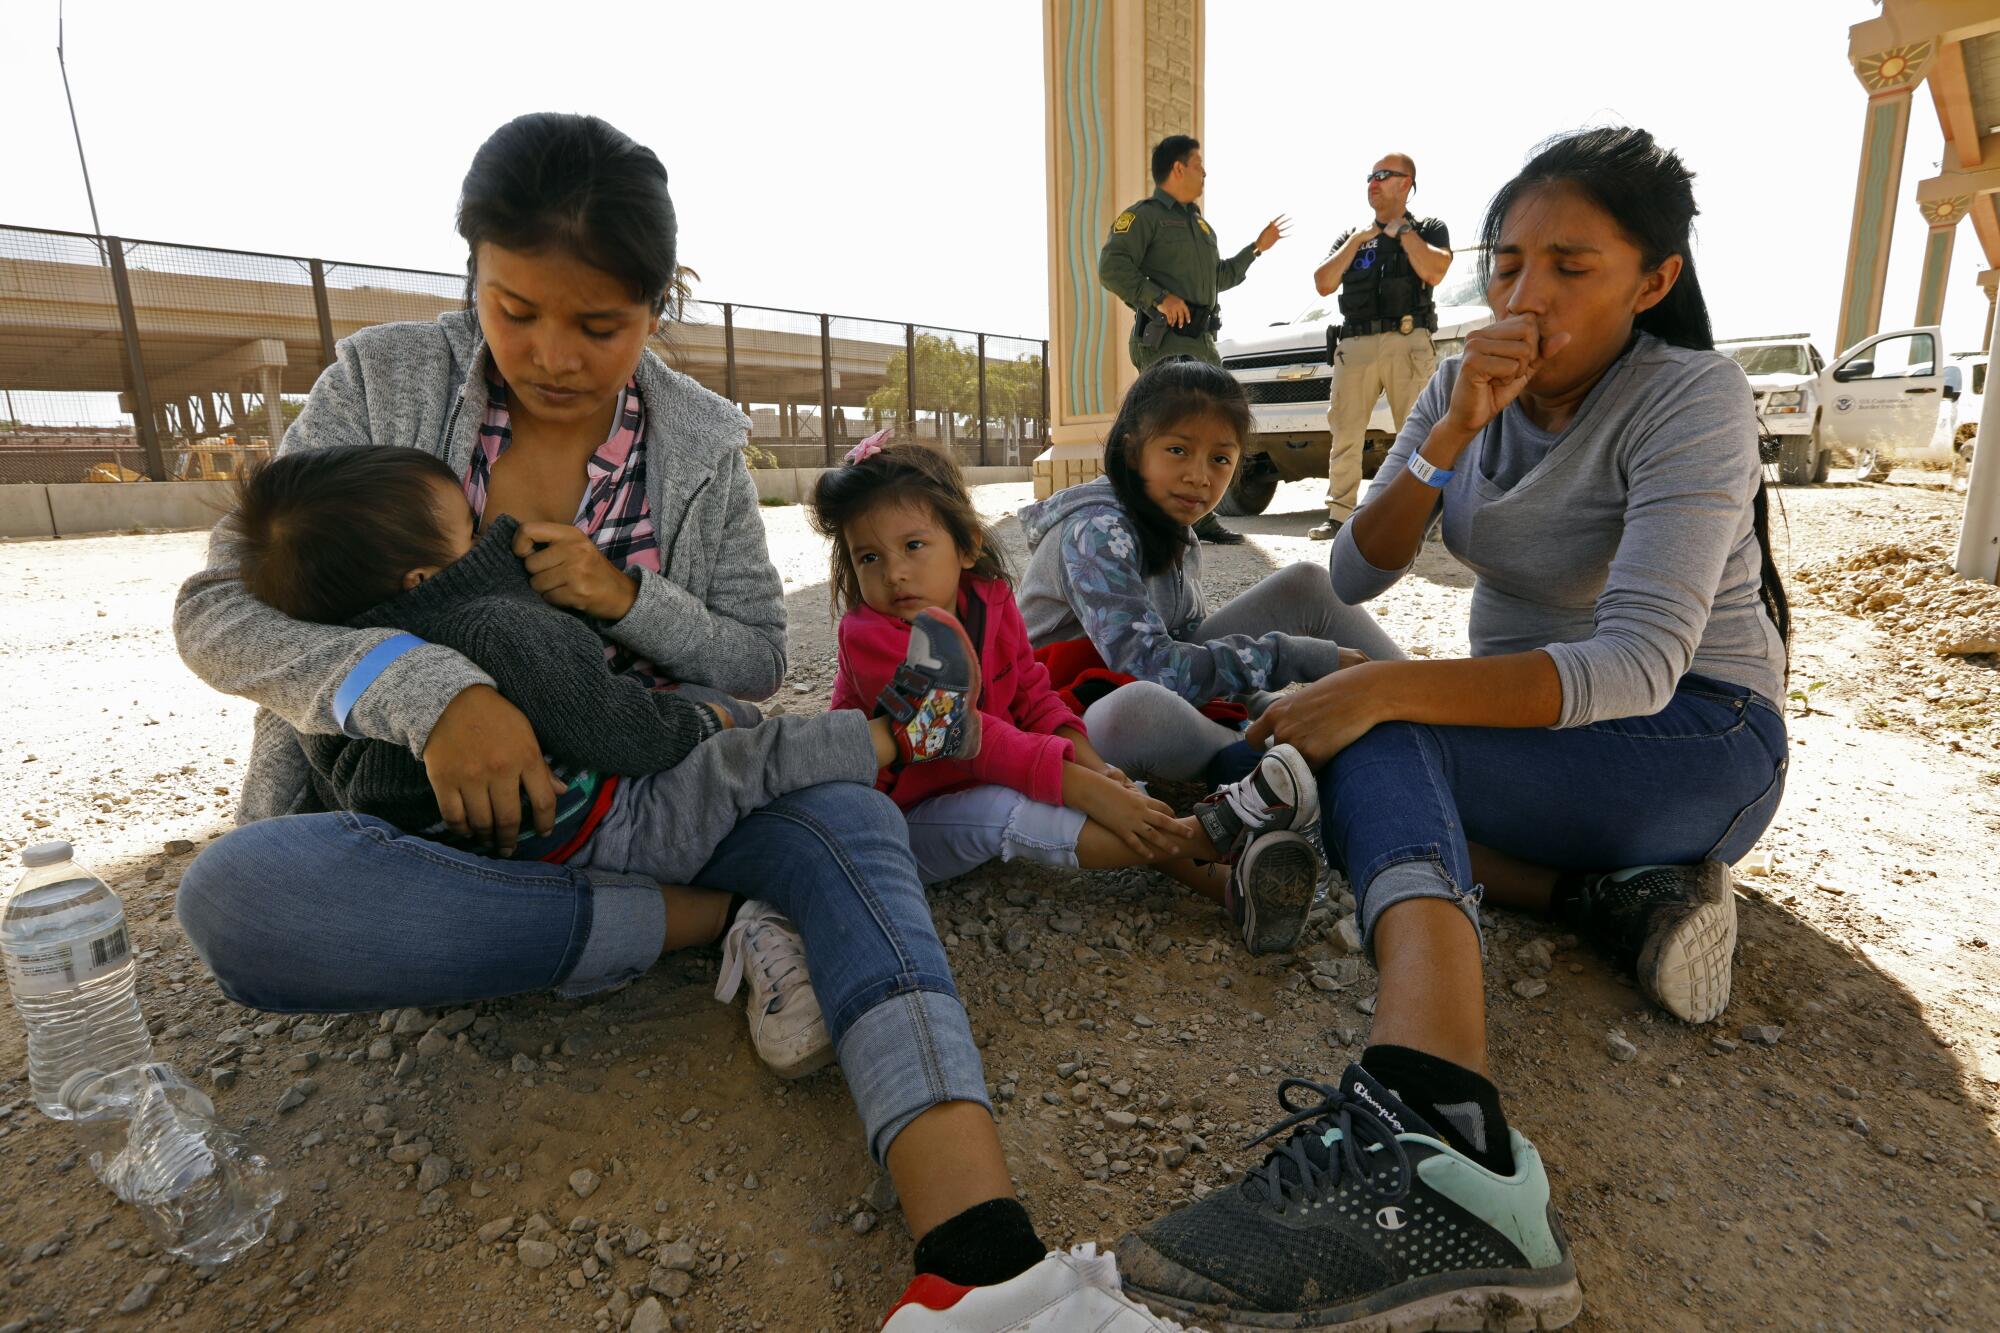 Lucero Gerarld, left, sits with her children as well as Darlene Perez, far right, and Perez's daughter. They crossed the border from Juarez, Mexico, to El Paso.